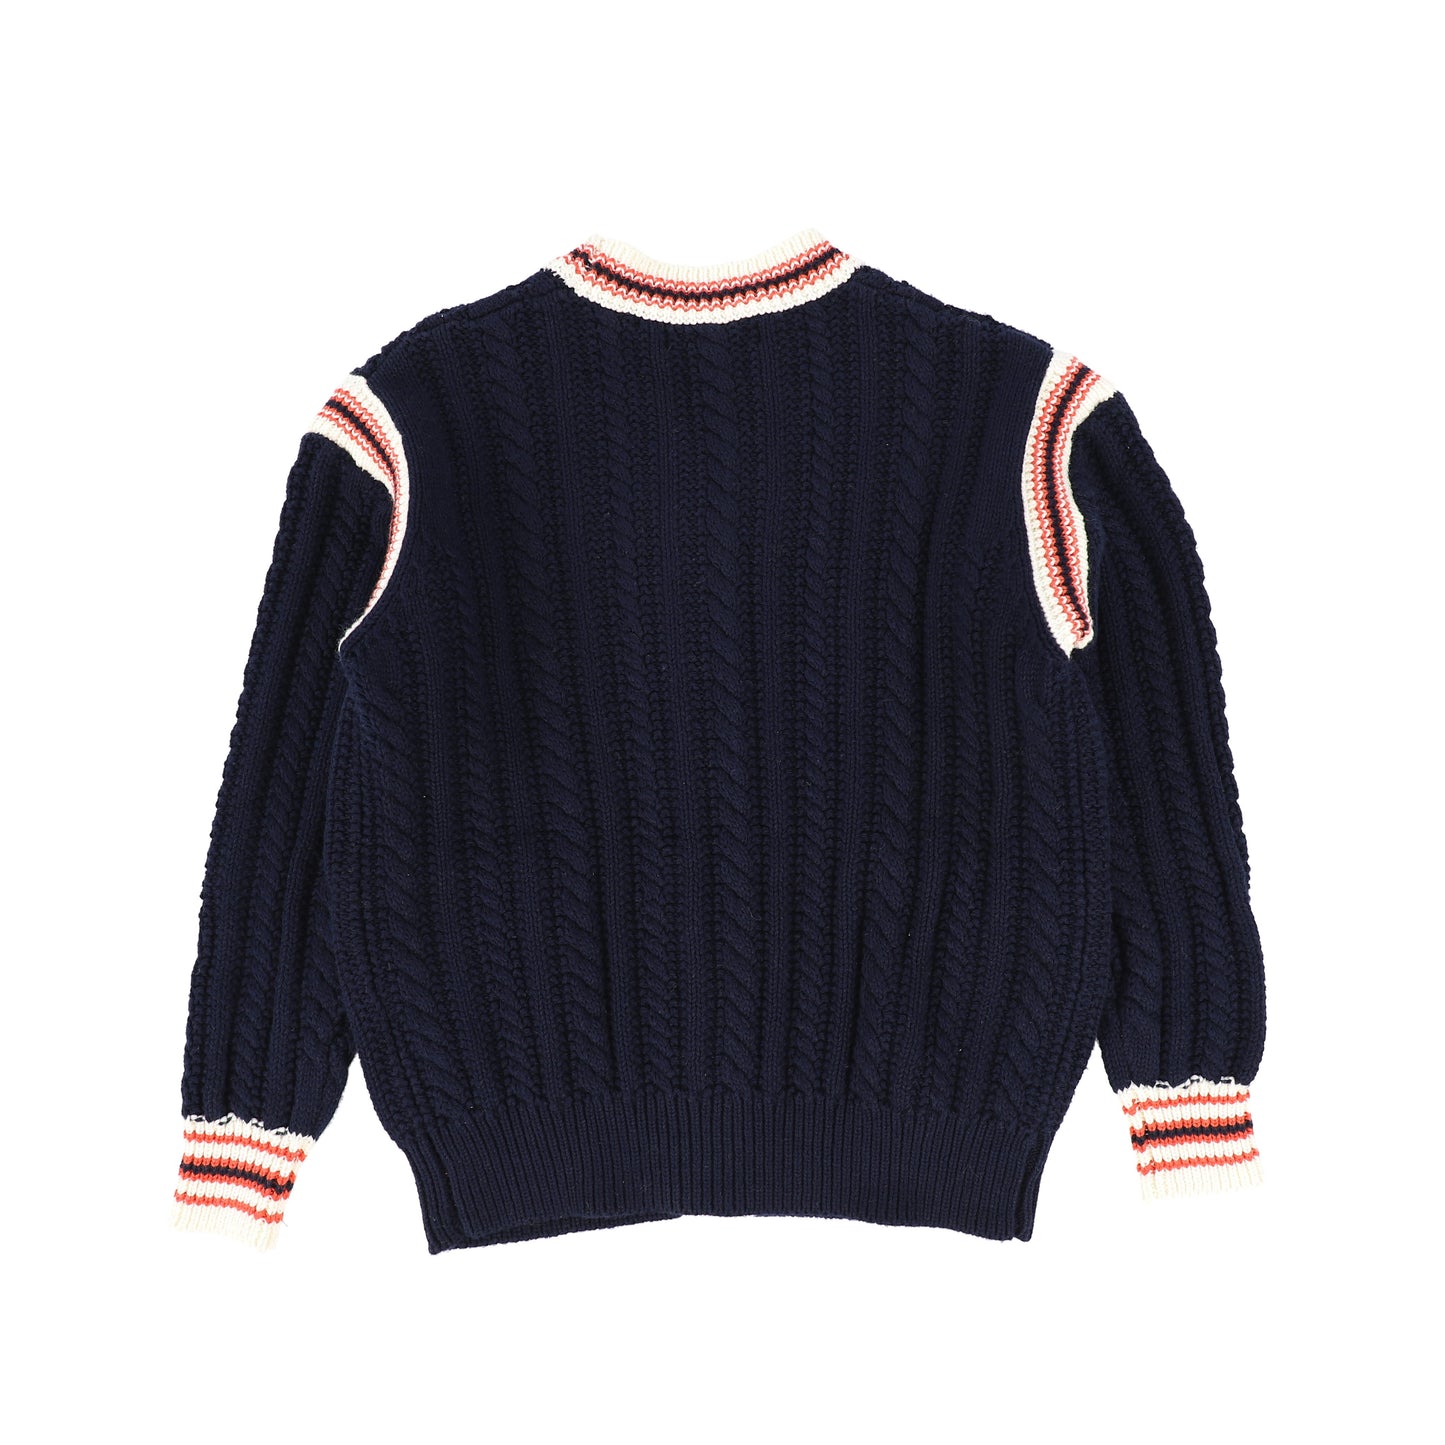 BAMBOO RED CABLE KNIT NAVY CARDIGAN WITH CONTRAST STITCHING [Final Sale]